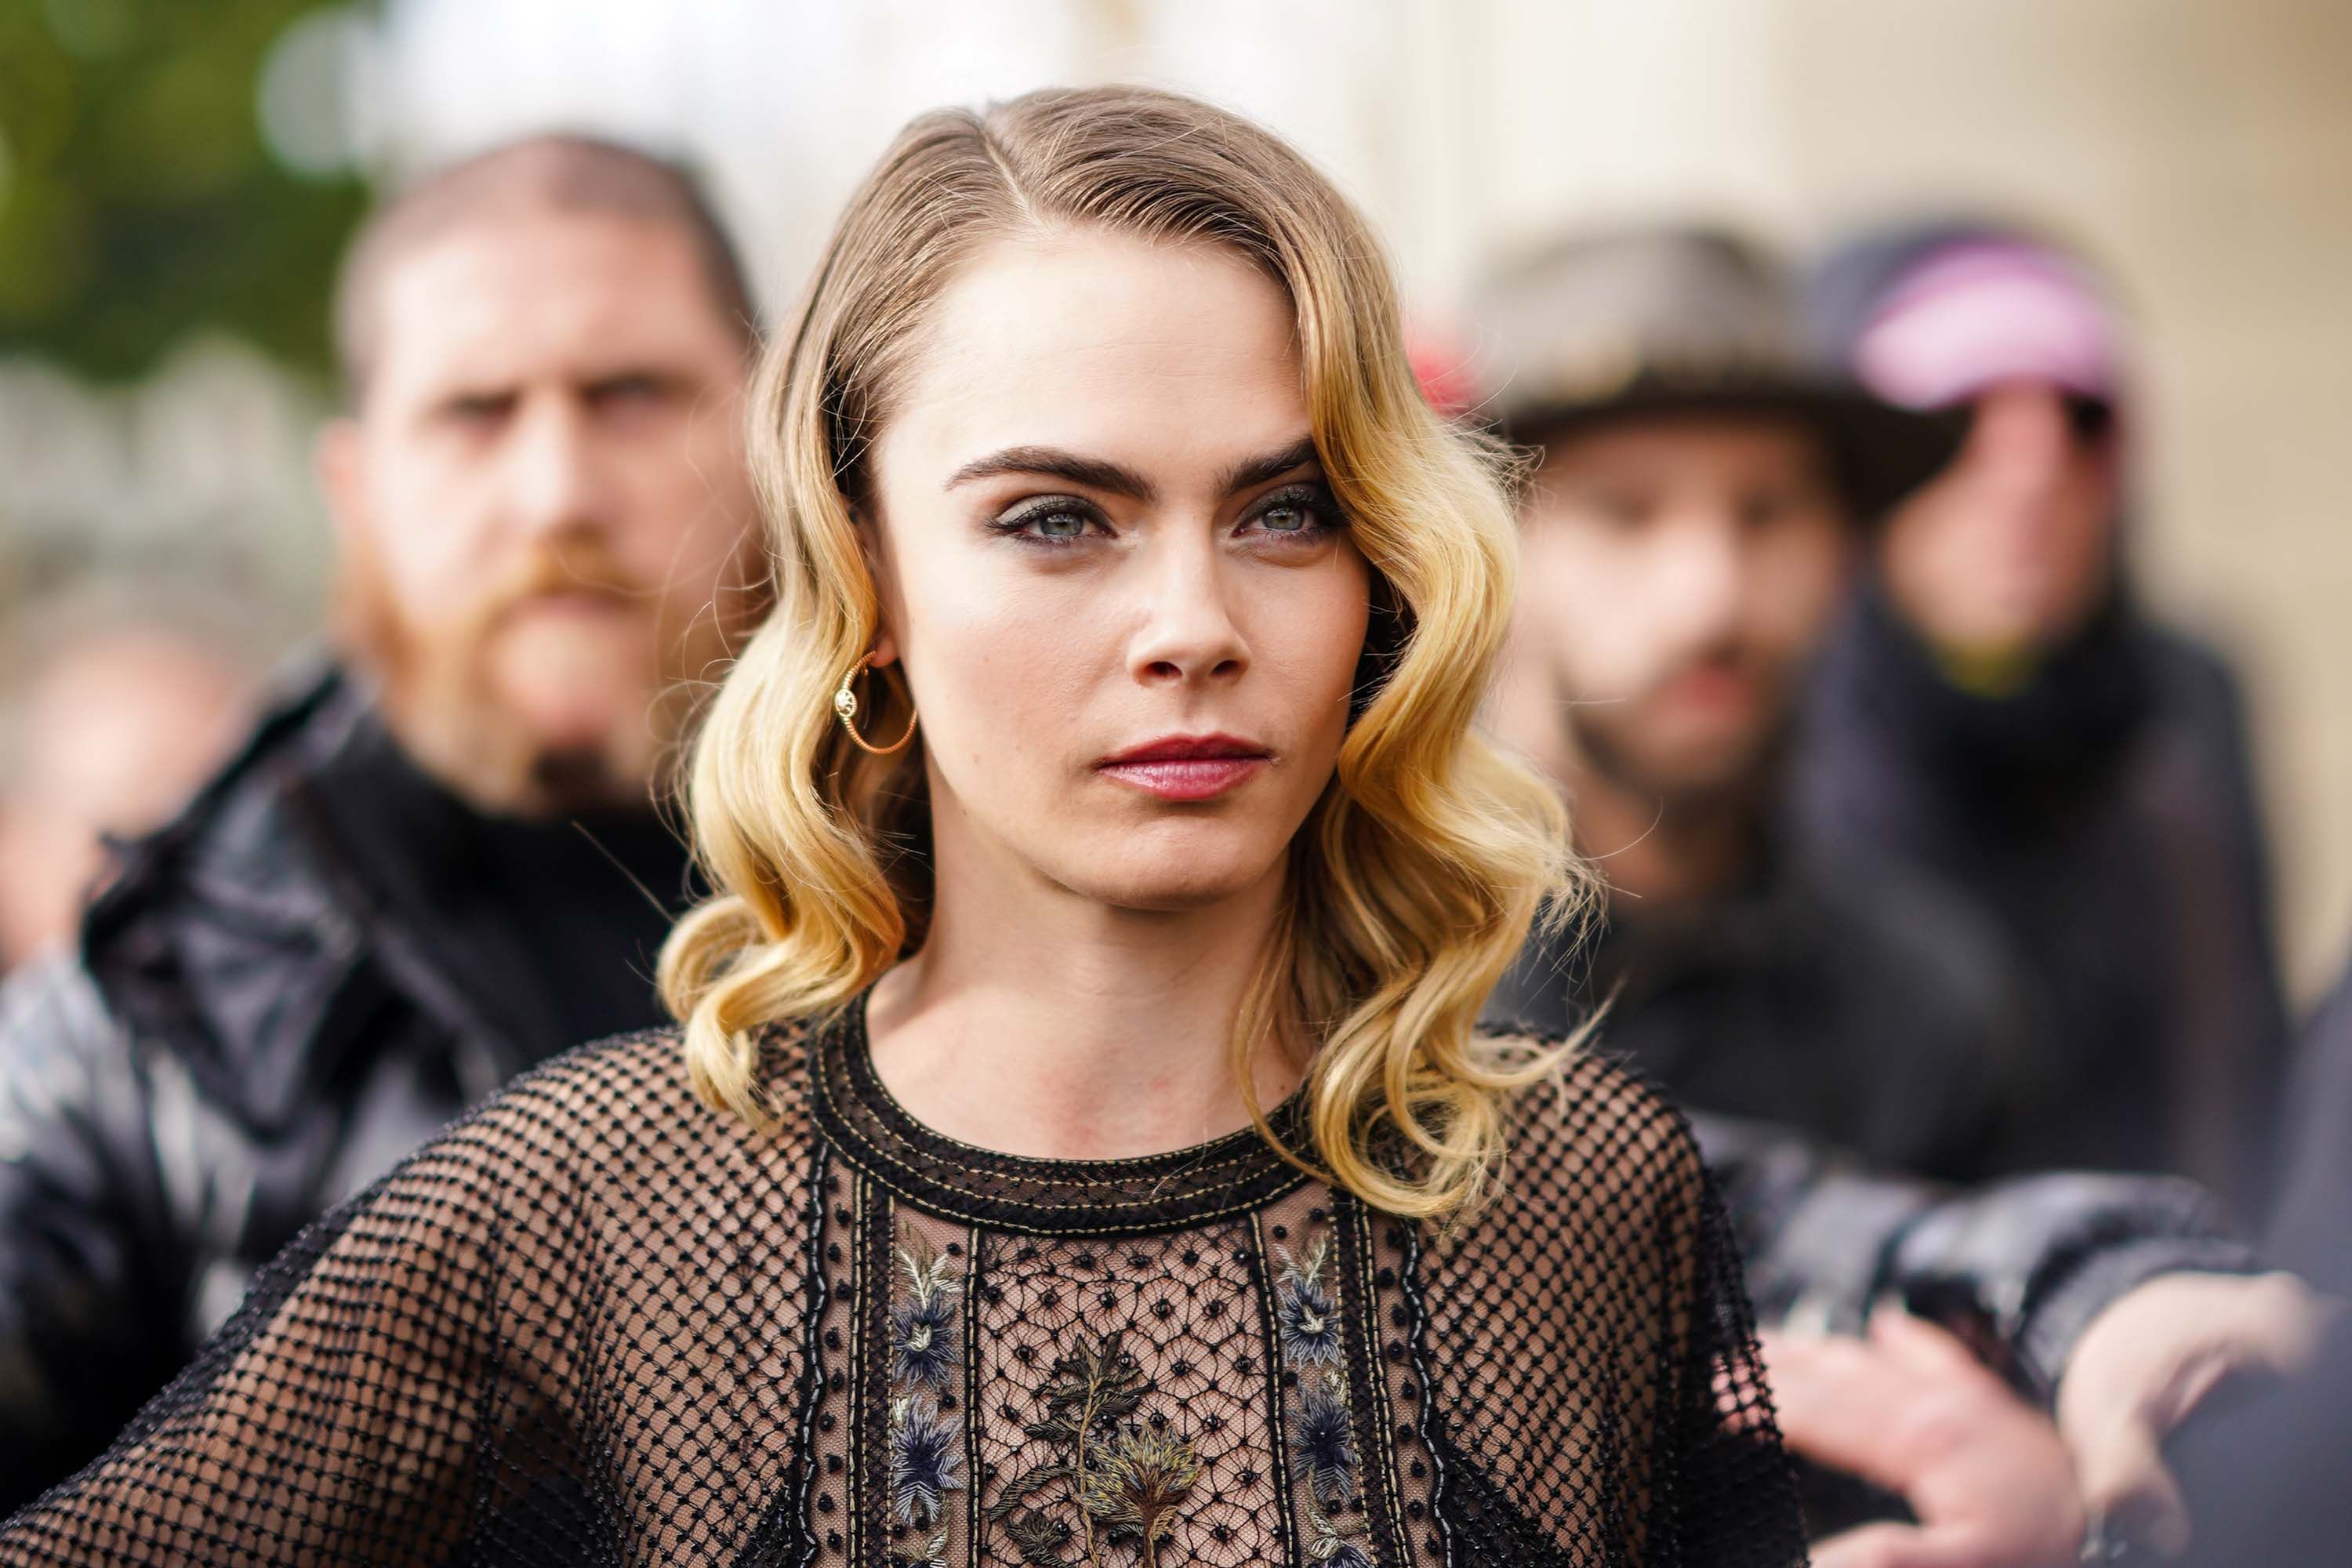 Cara Delevingne to explore sexual identity in TV series Planet